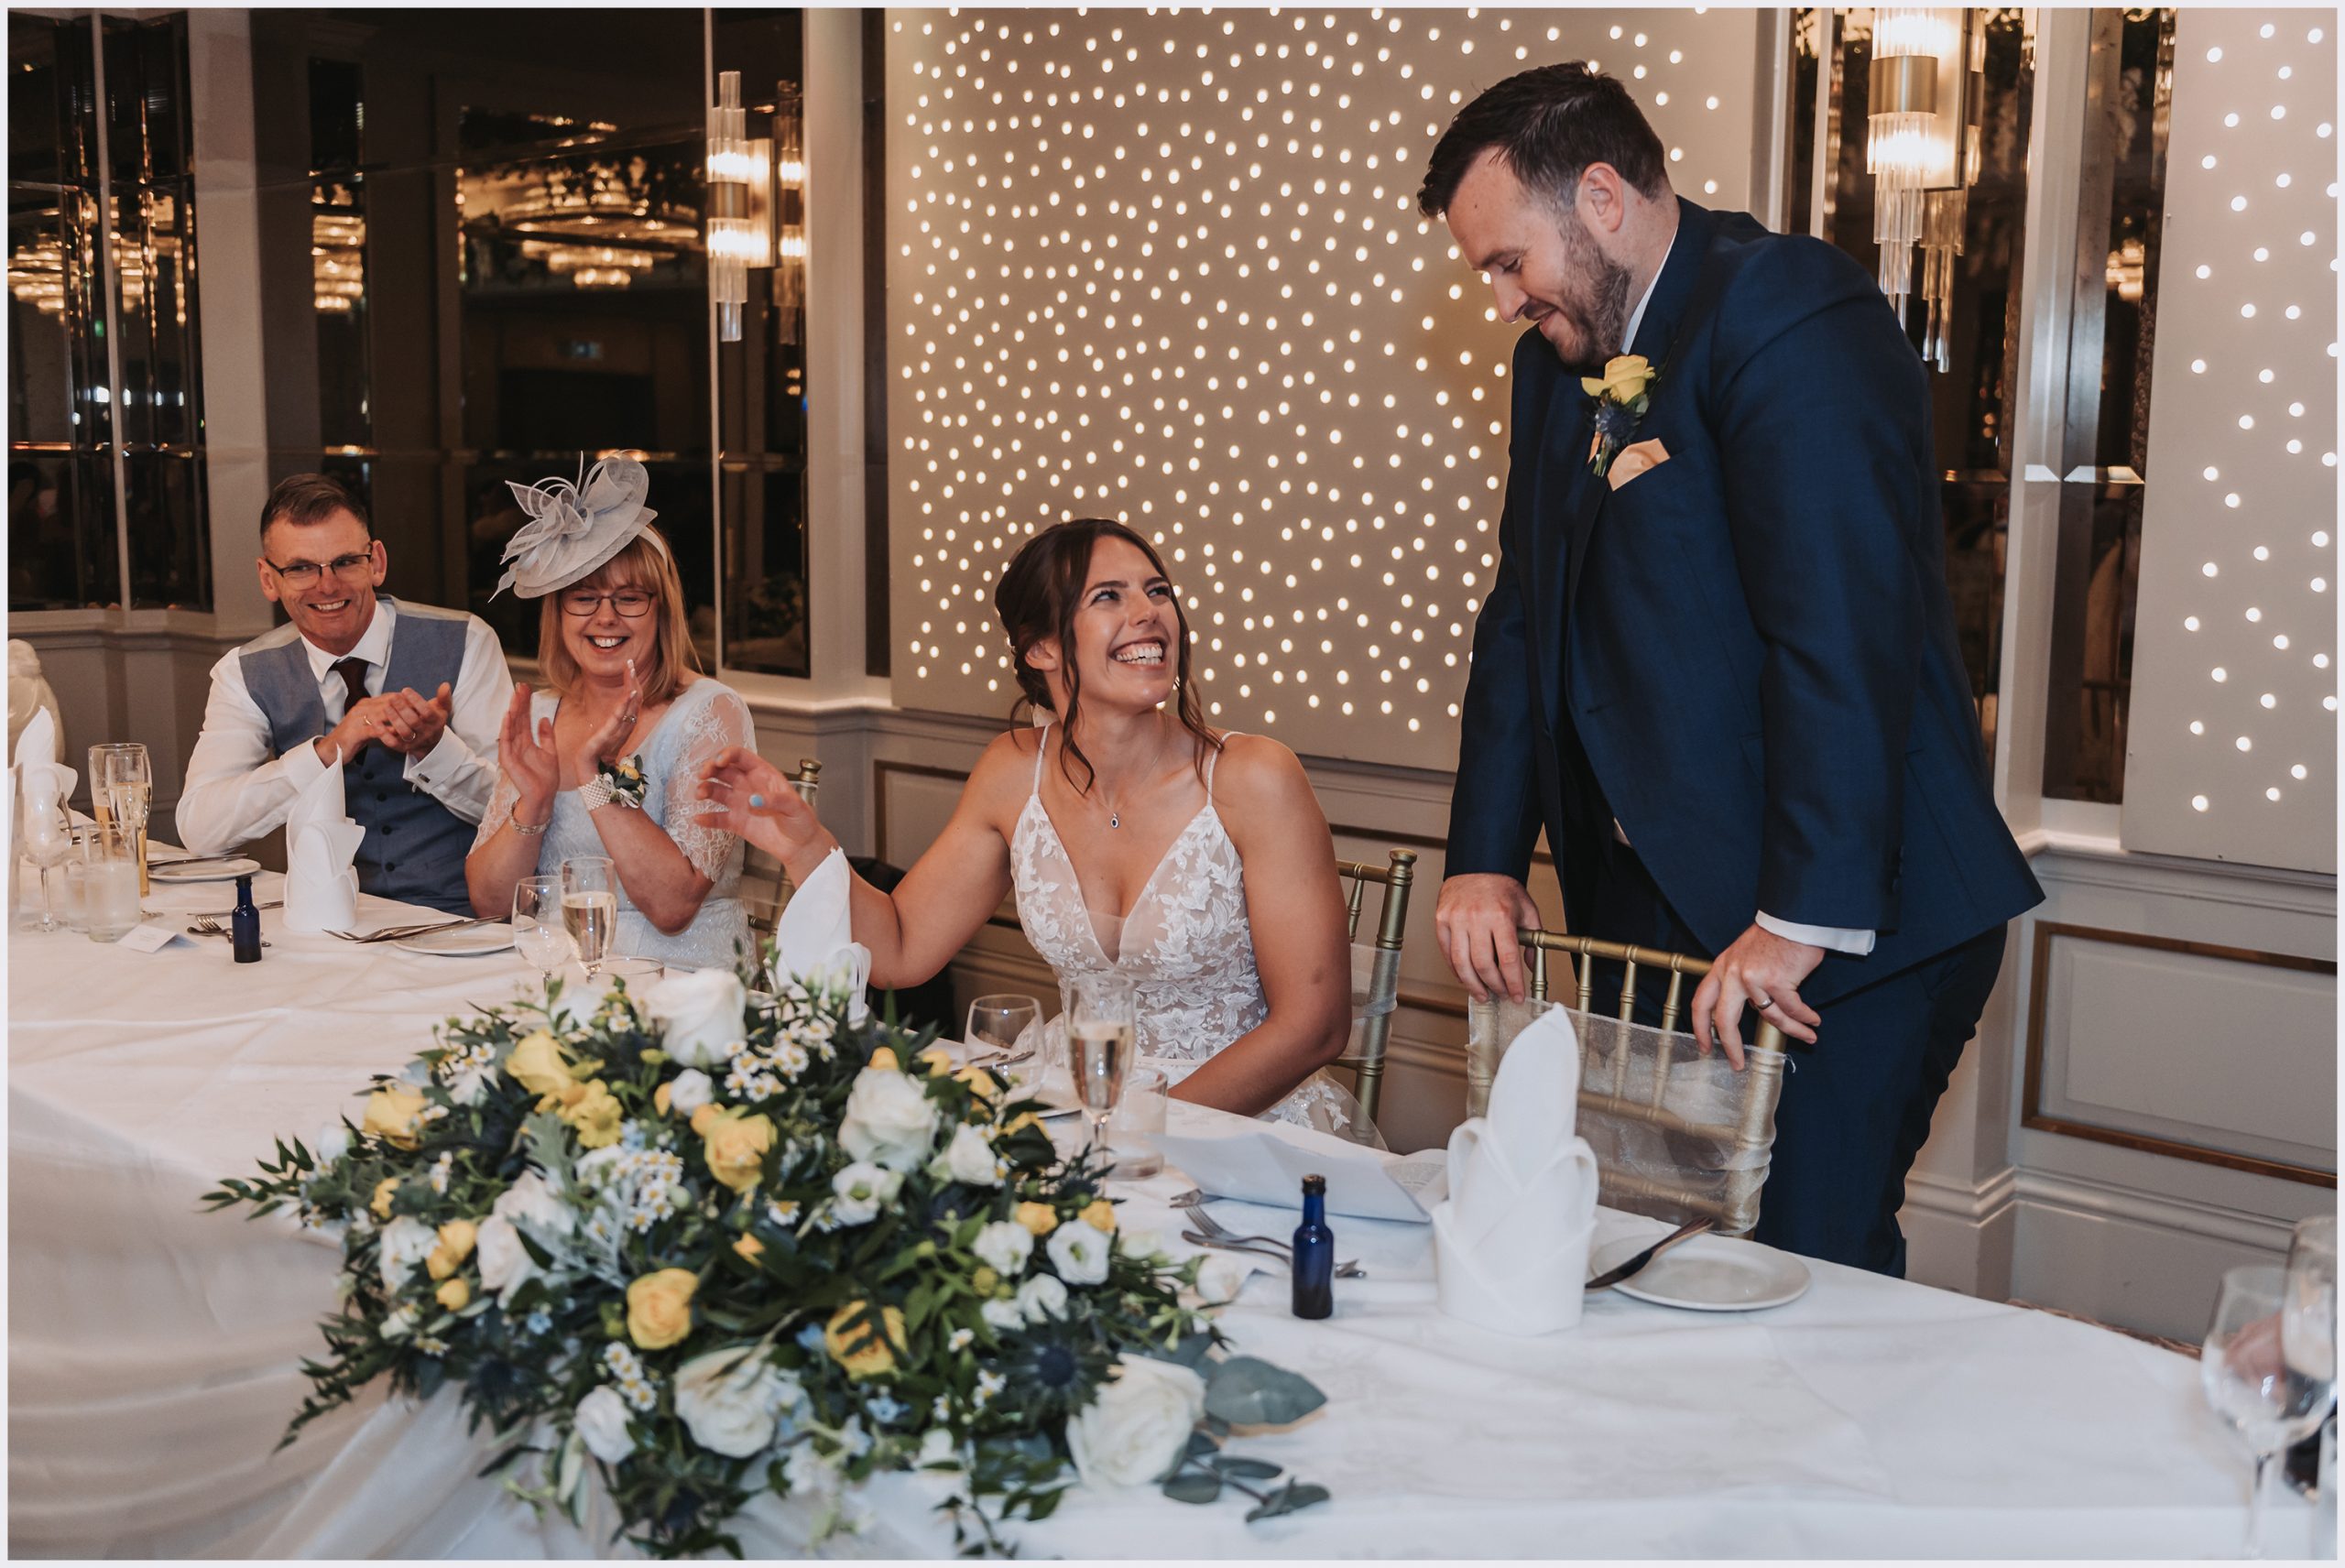 A bride looks up at her husband smiling while he makes his speech at their wedding at The Grosvenor Pulford Hotel and Spa